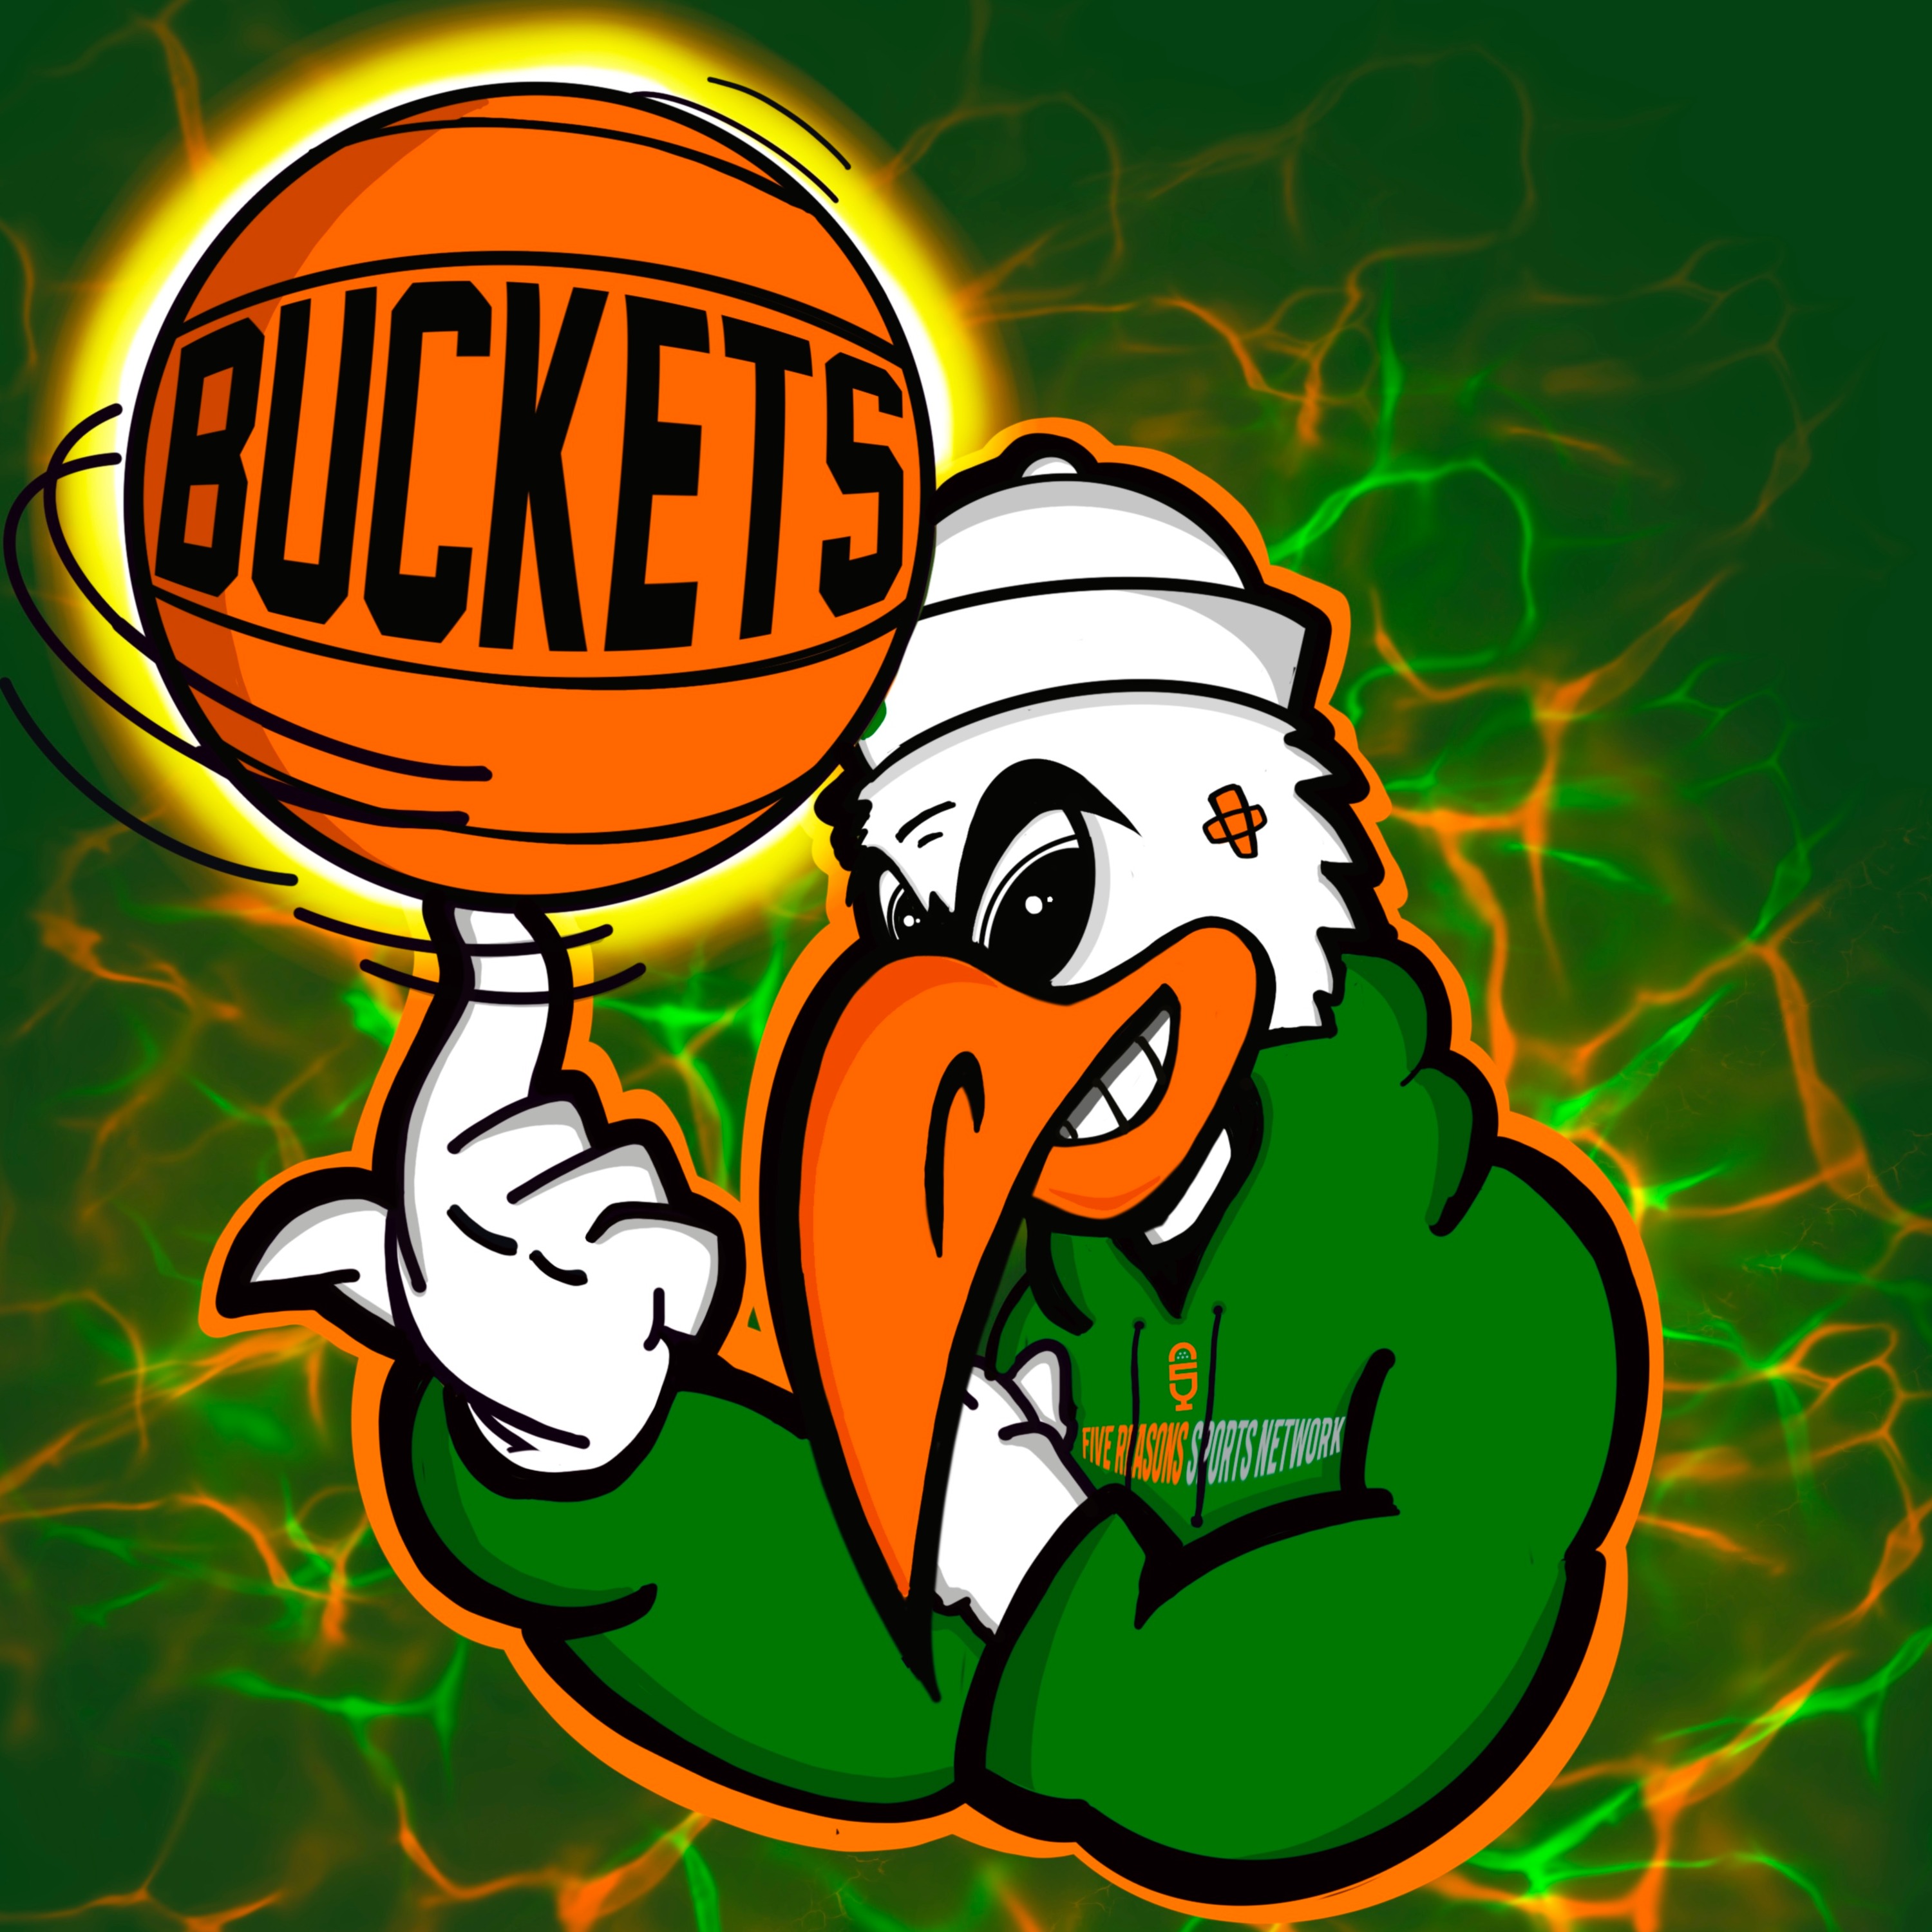 Canes Use of the Portal | Buckets